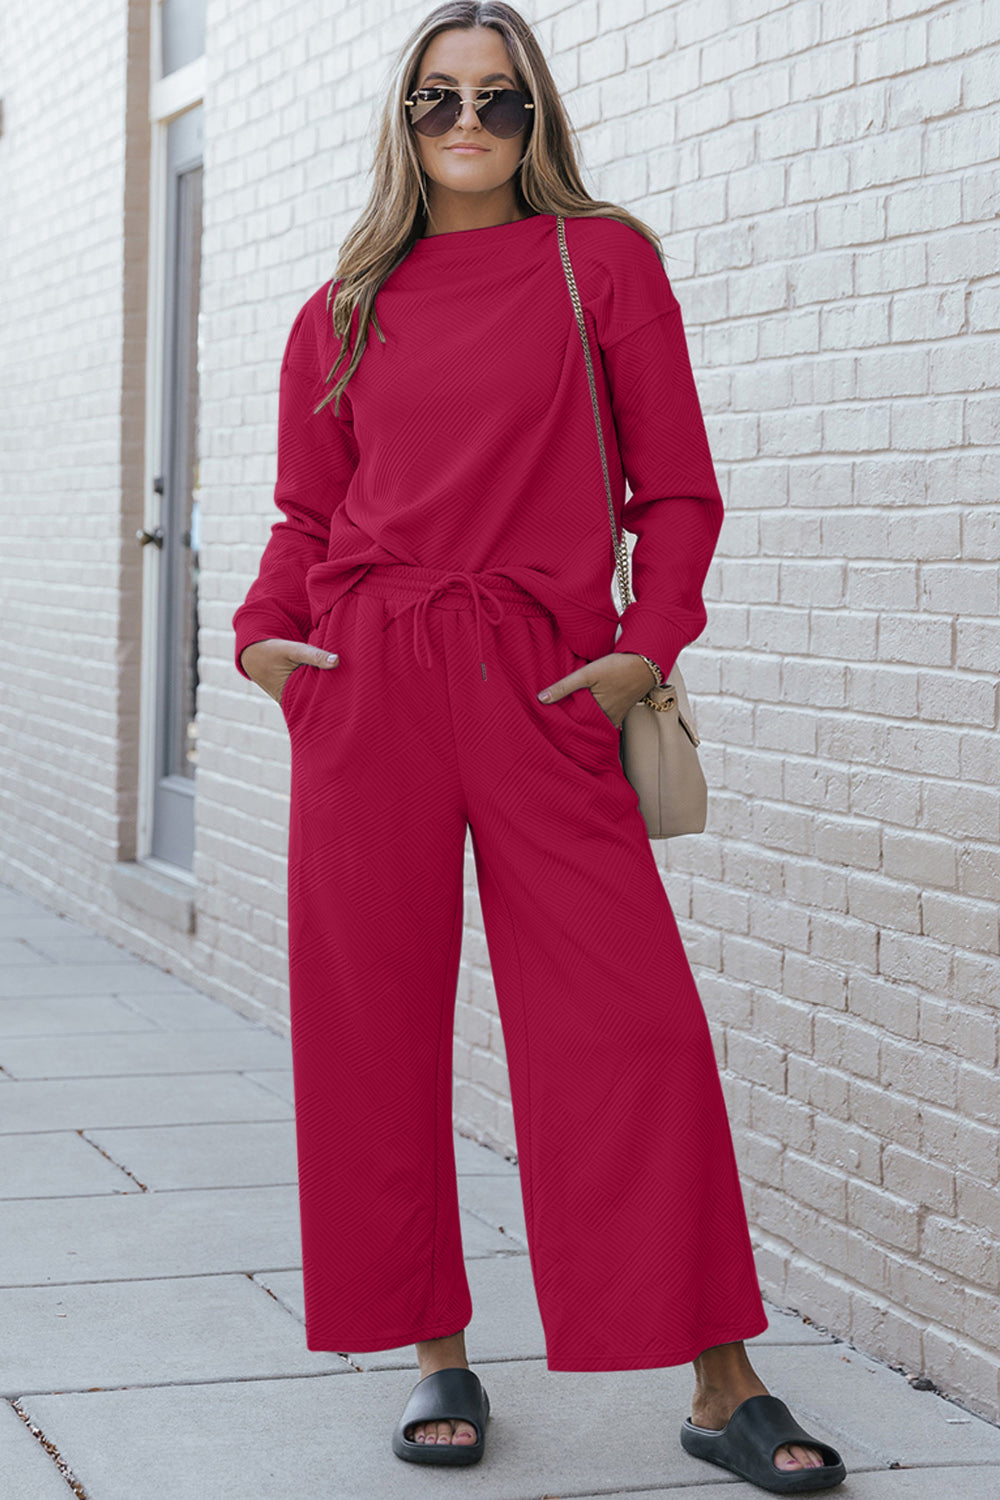 Double Take Full Size Textured Long Sleeve Top and Drawstring Pants Set Cerise XL 